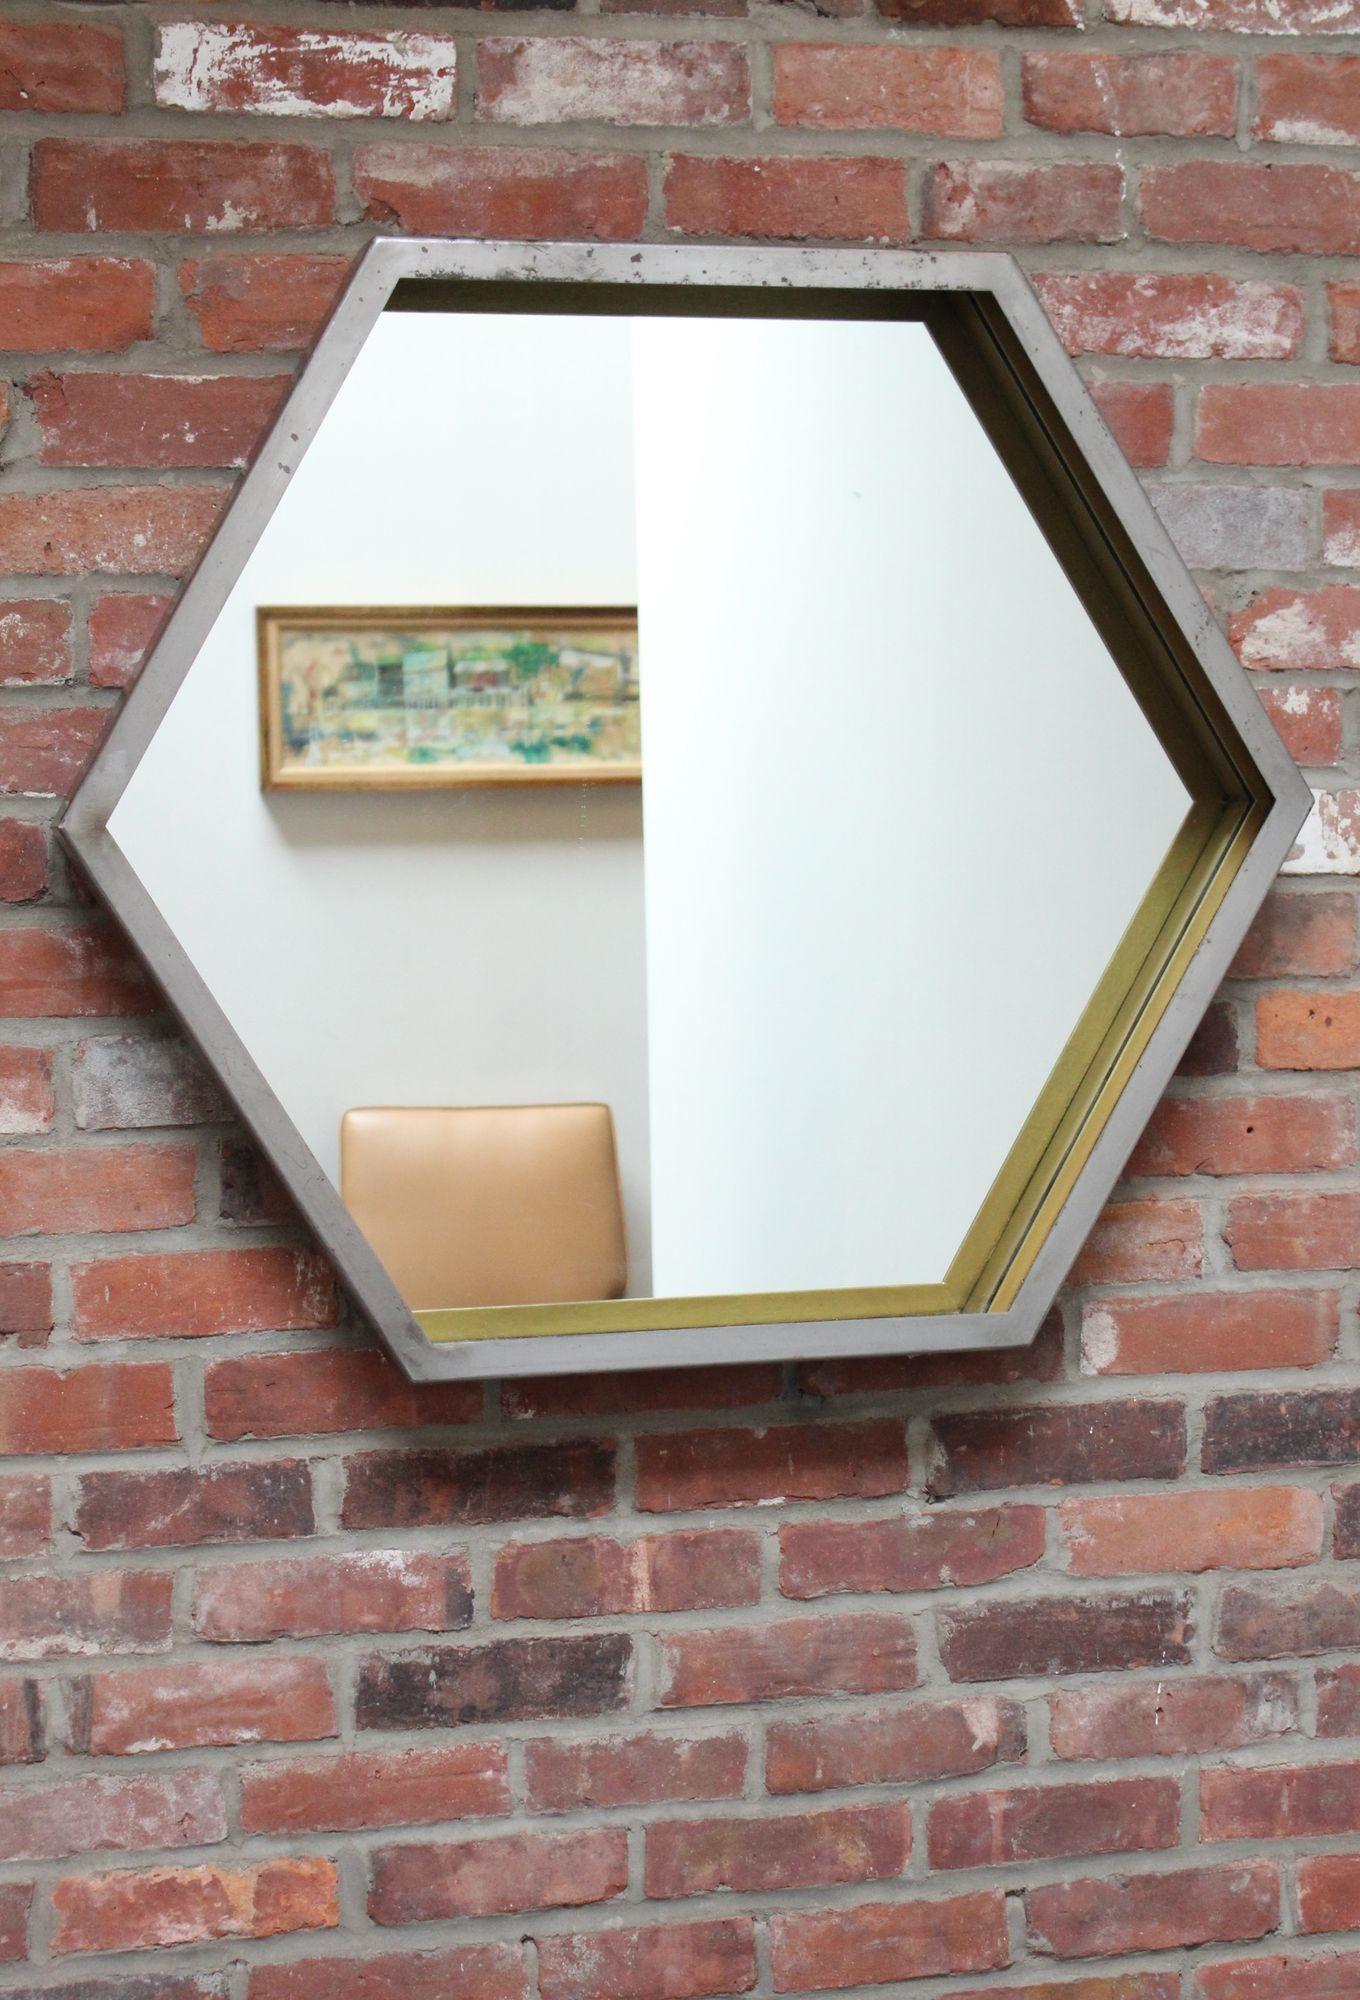 Contemporary custom made hexagonal-form wall mirror designed and built by Brooklyn, NY Industrial designer and artist, Scott Behr. Measures: 29.75